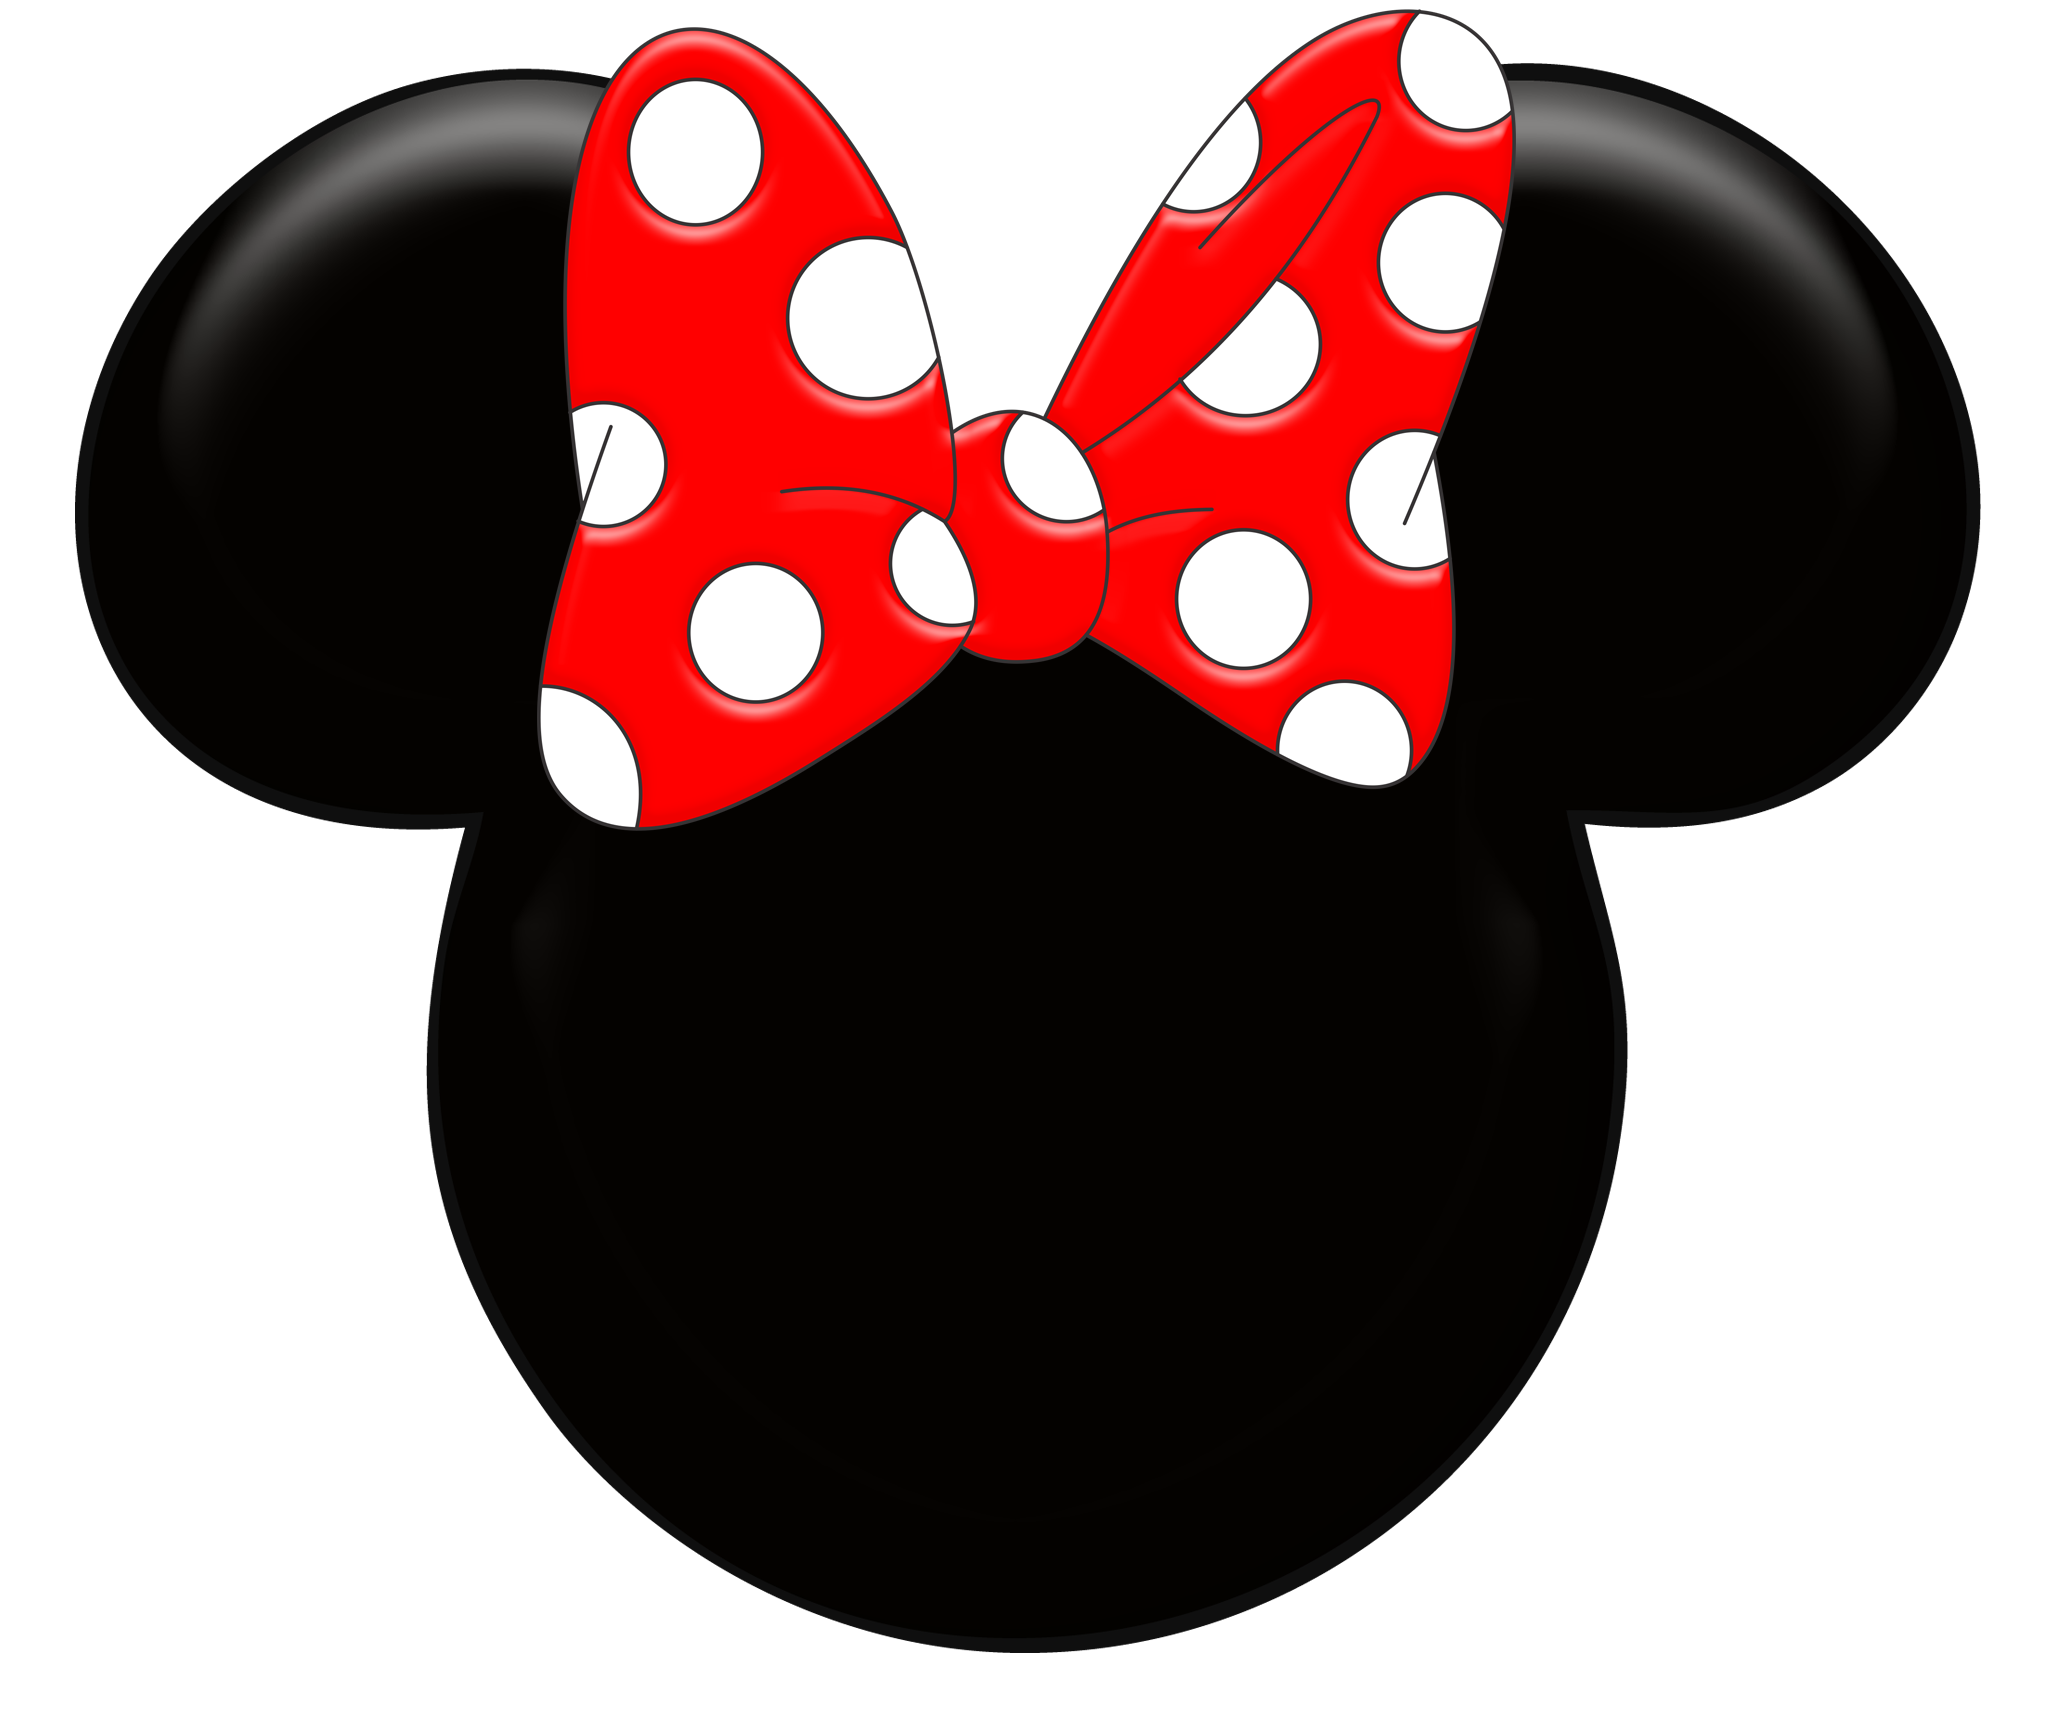 Minnie Mouse Ears Silhouette Clipart